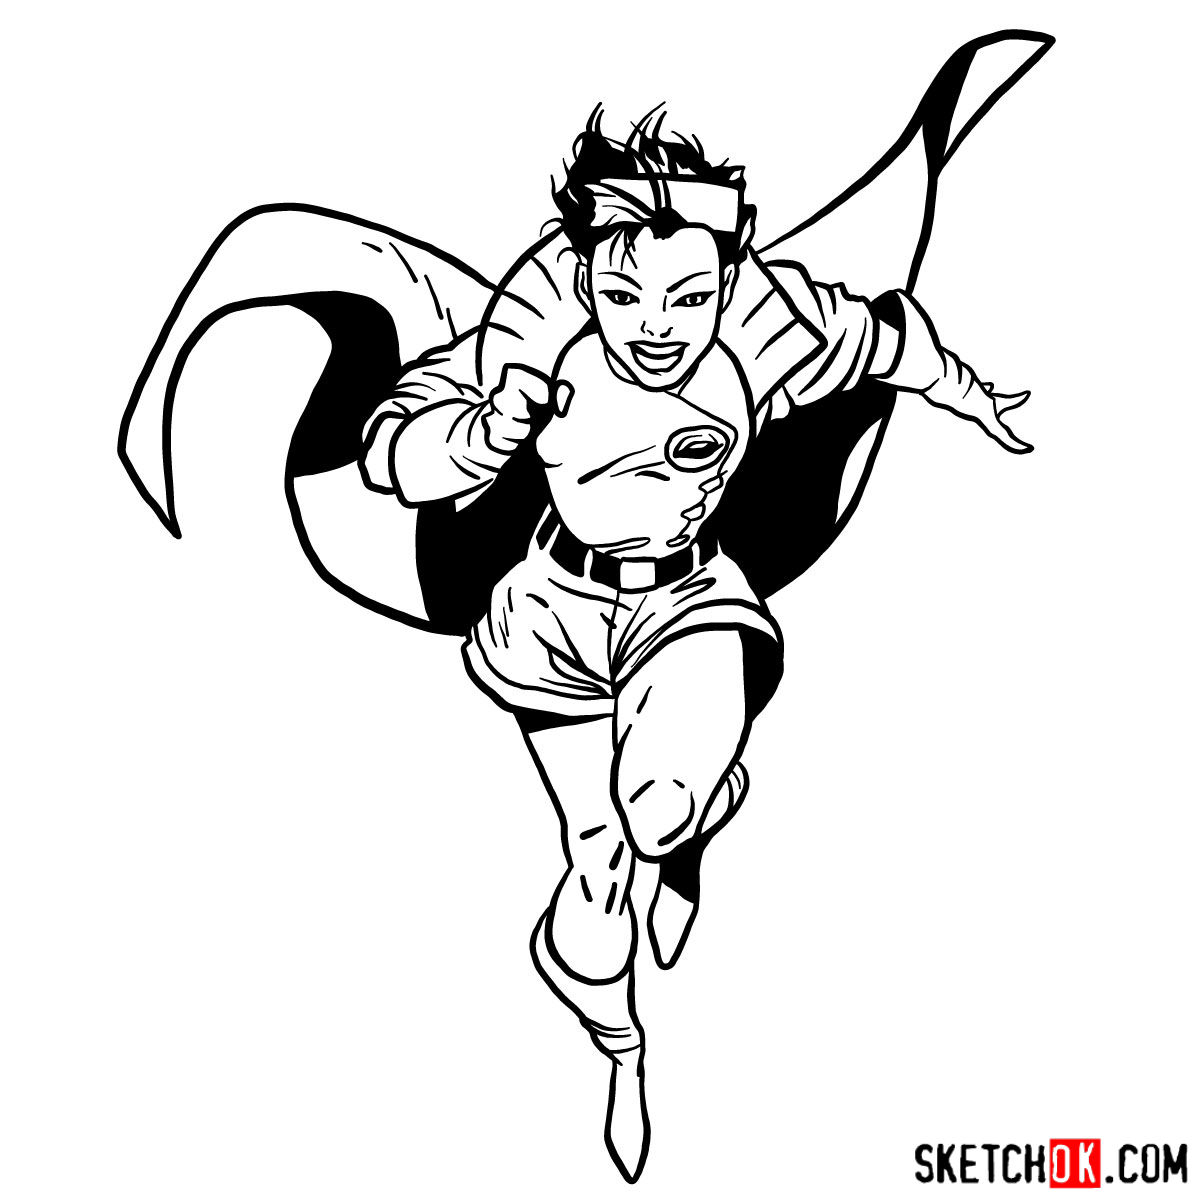 How to draw Jubilee mutant from X-Men series - step 15